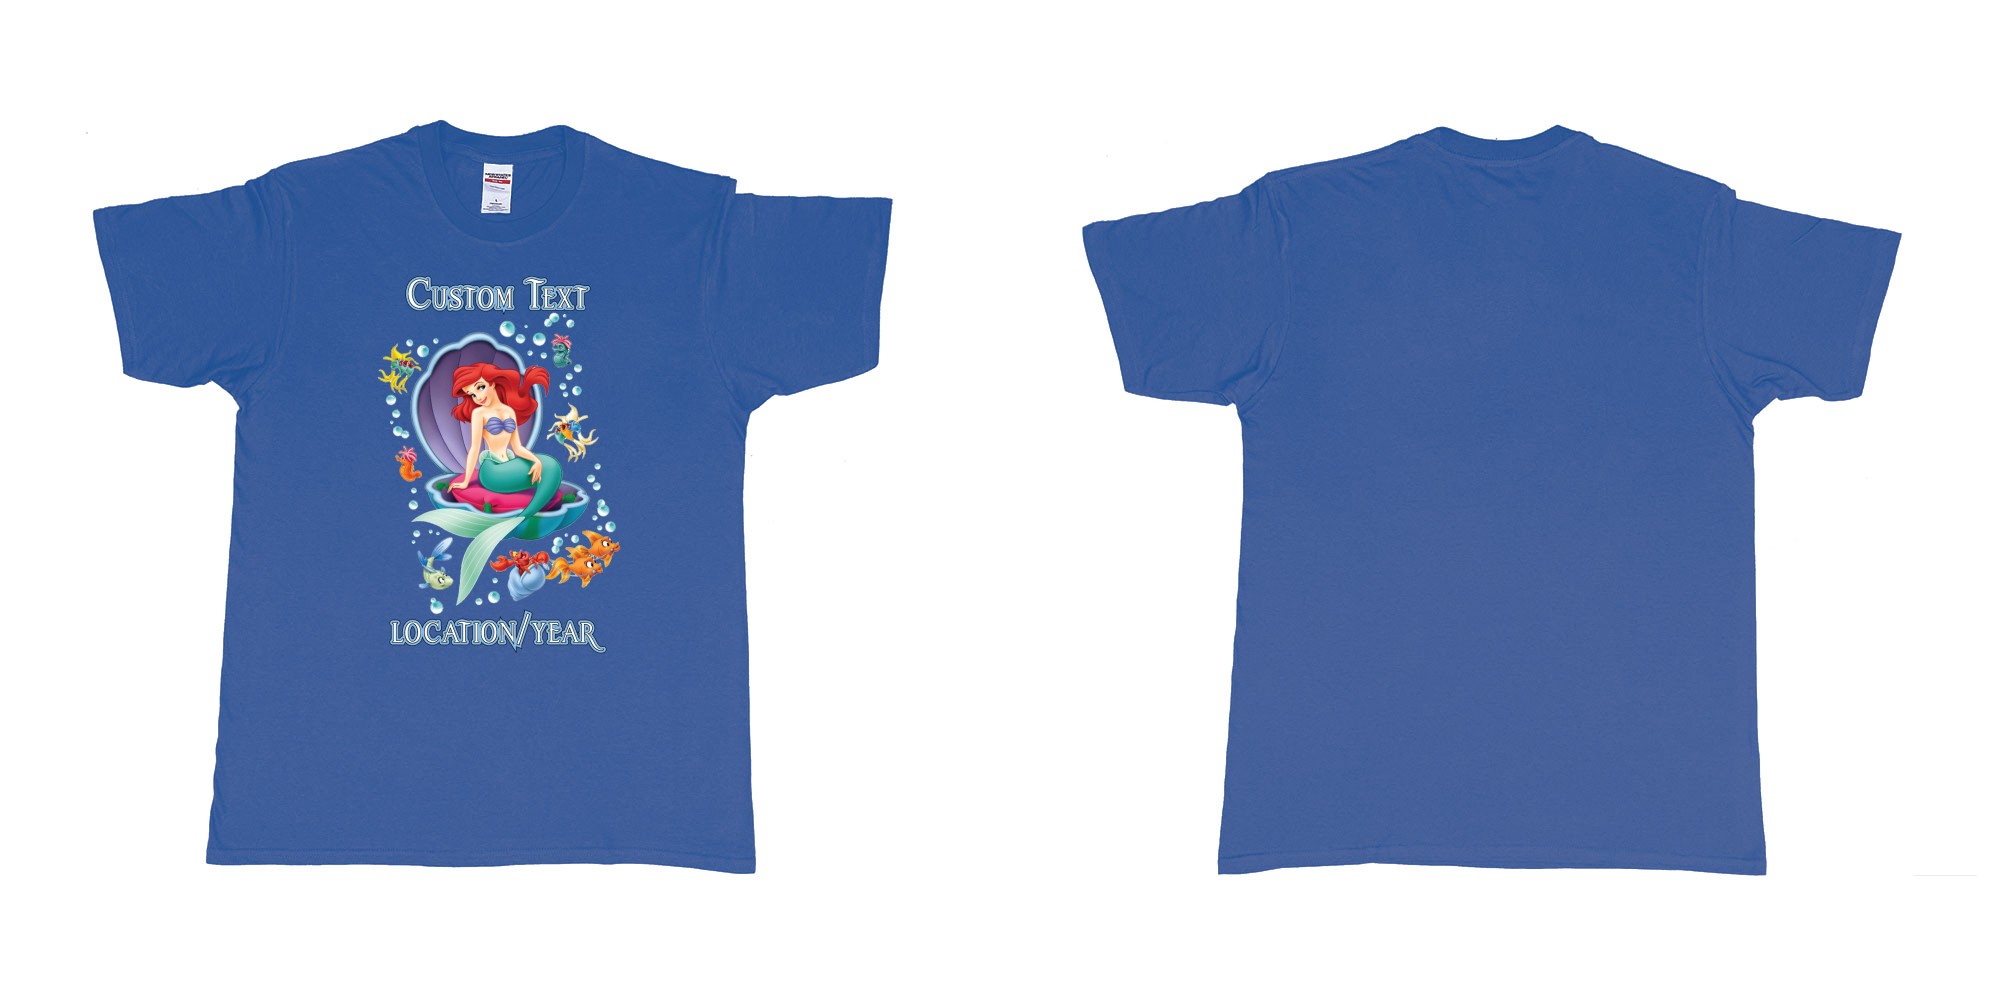 Custom tshirt design little mermaid shell birthday in fabric color royal-blue choice your own text made in Bali by The Pirate Way